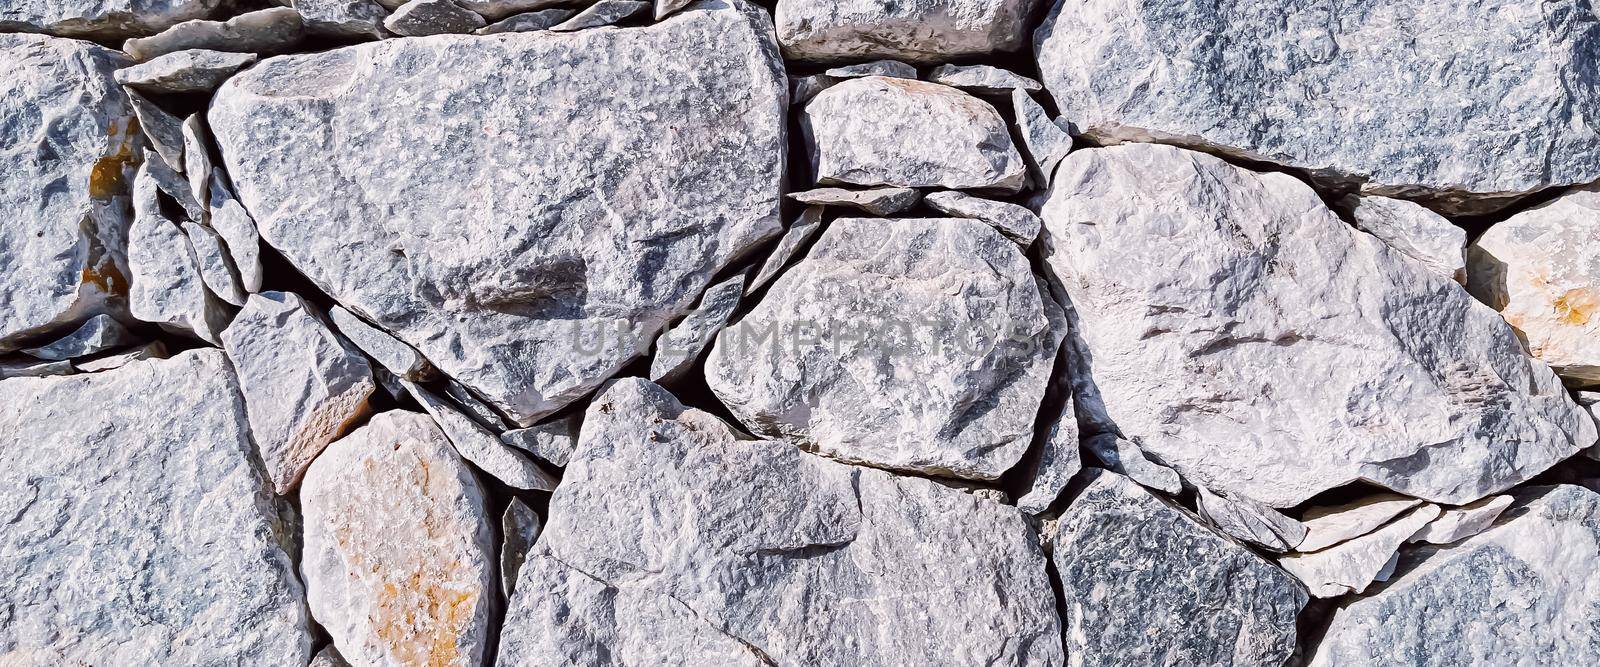 Stone texture and exterior design concept. Stonewall made of natural rocks as architectural surface background.